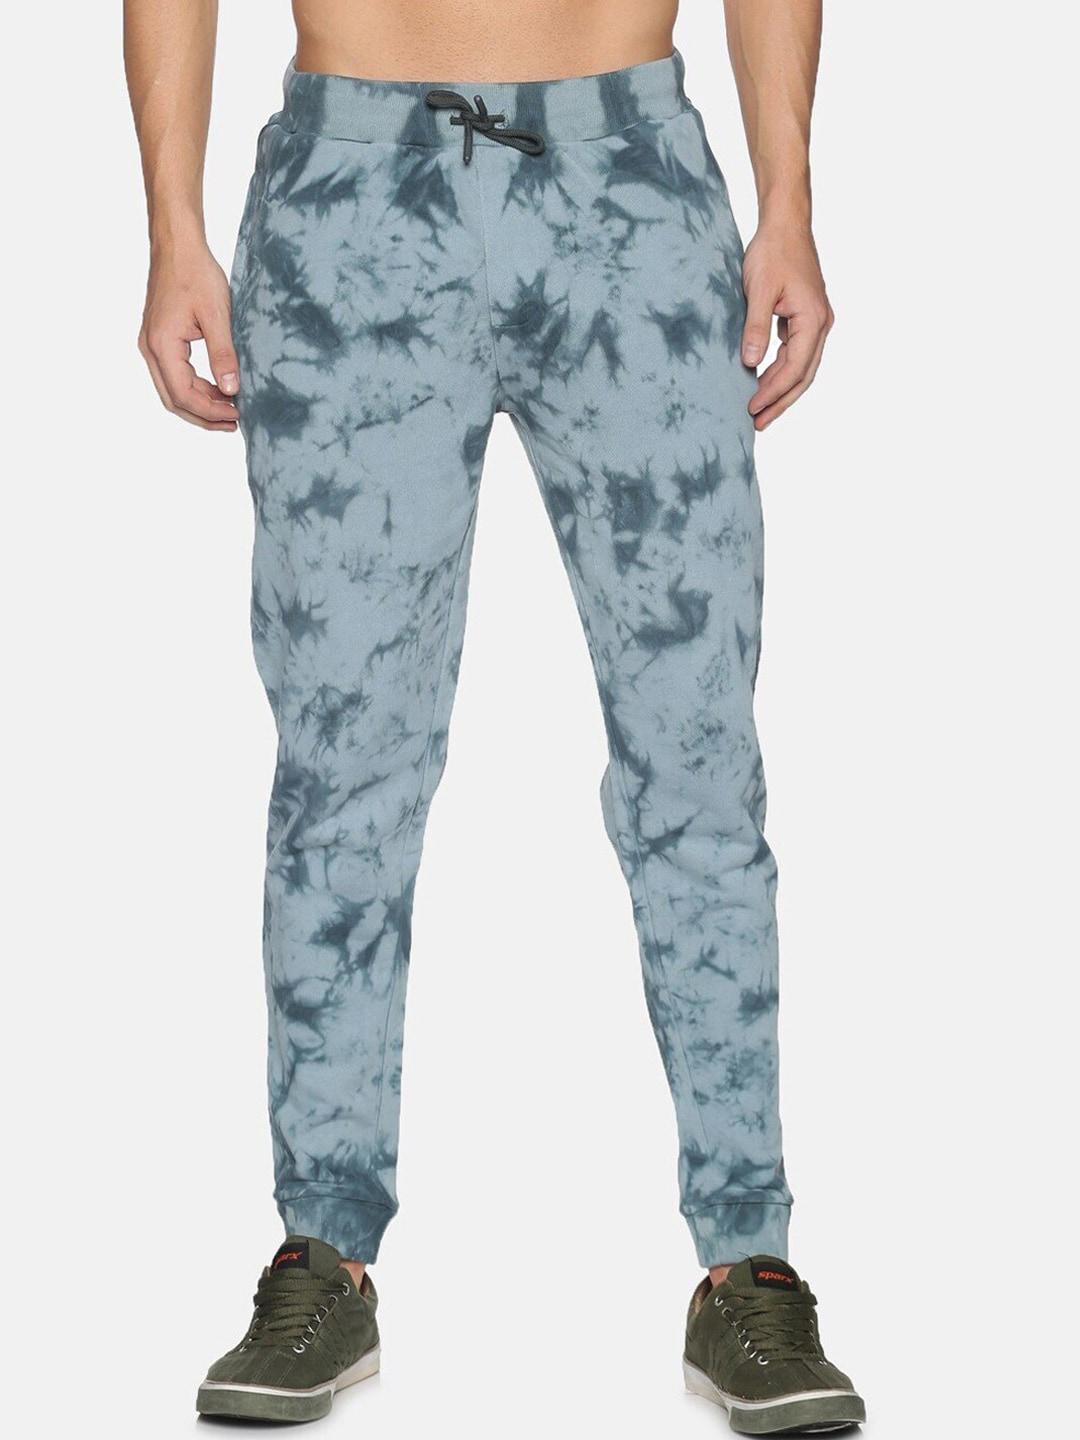 steenbok-men-tie-and-dye-printed-high-rise-cotton-joggers